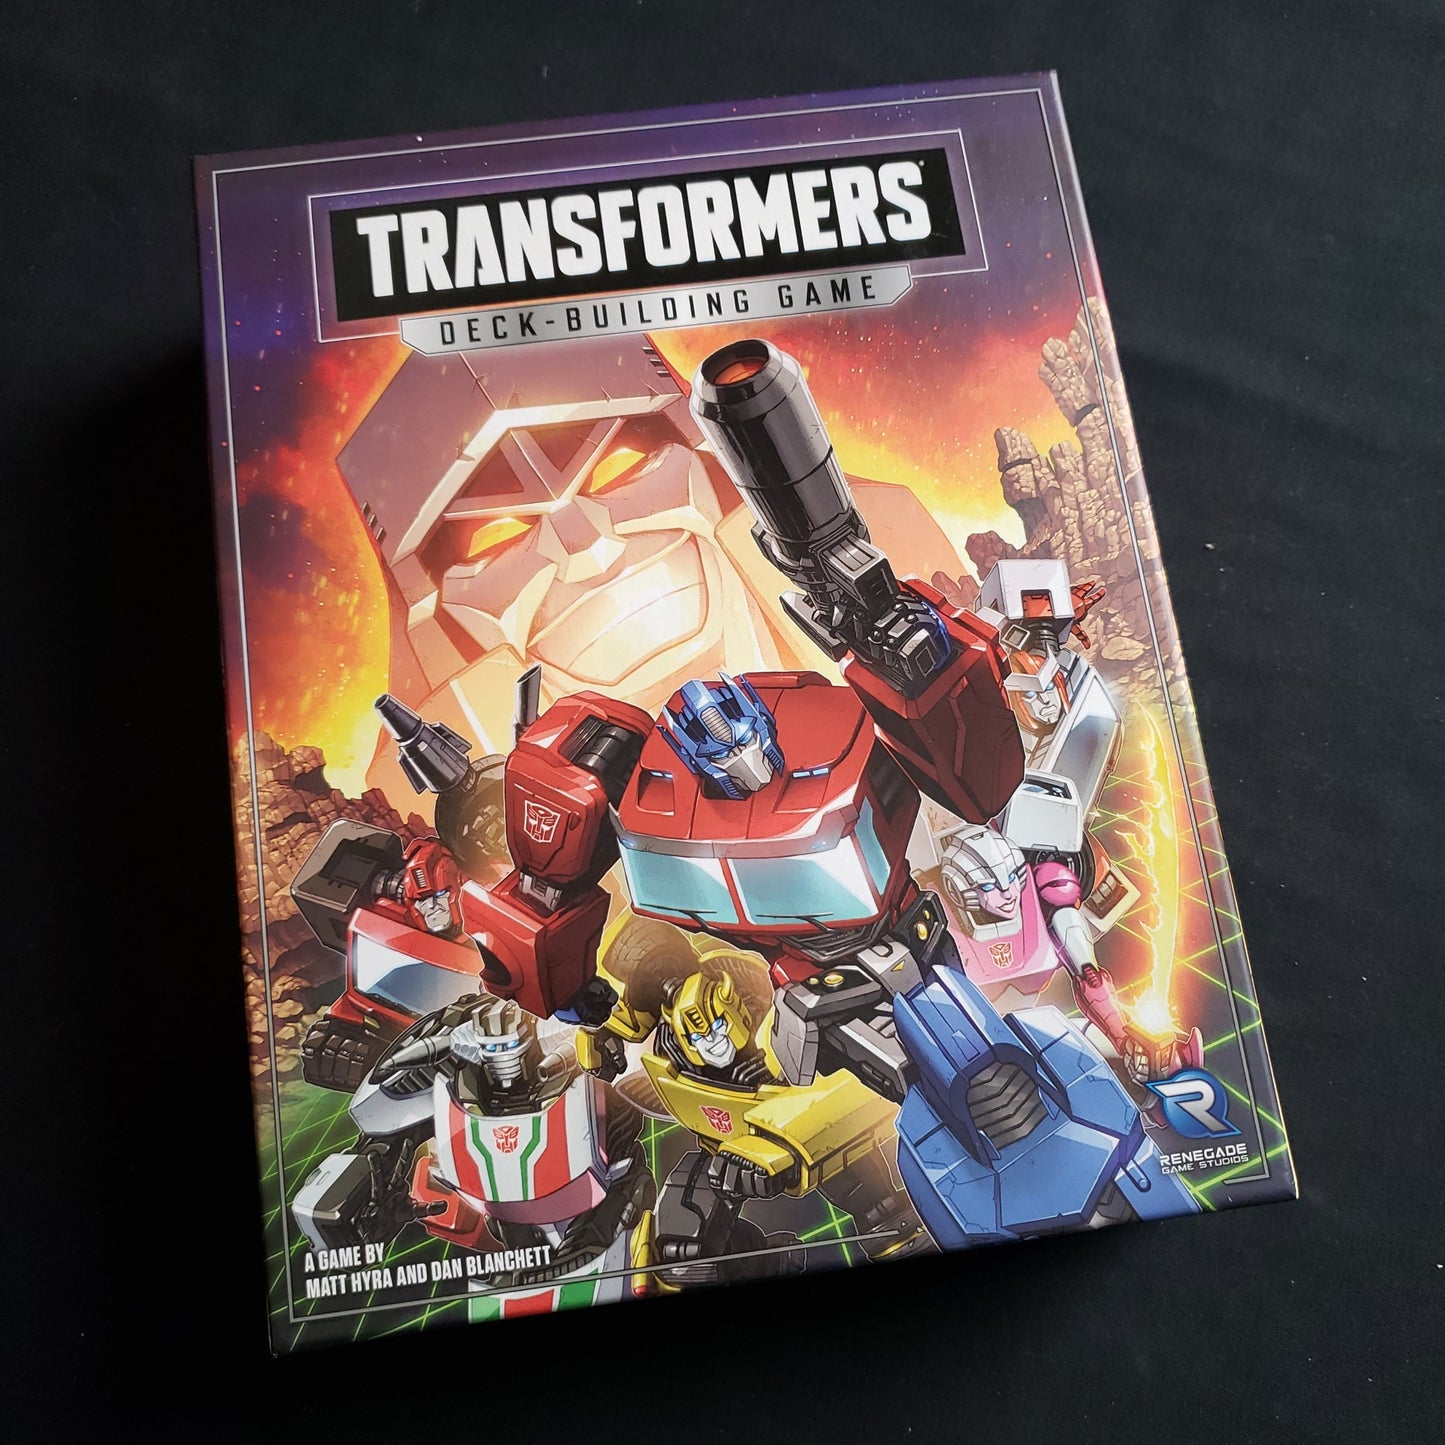 Image shows the front cover of the box of the Transformers Deckbuilding game